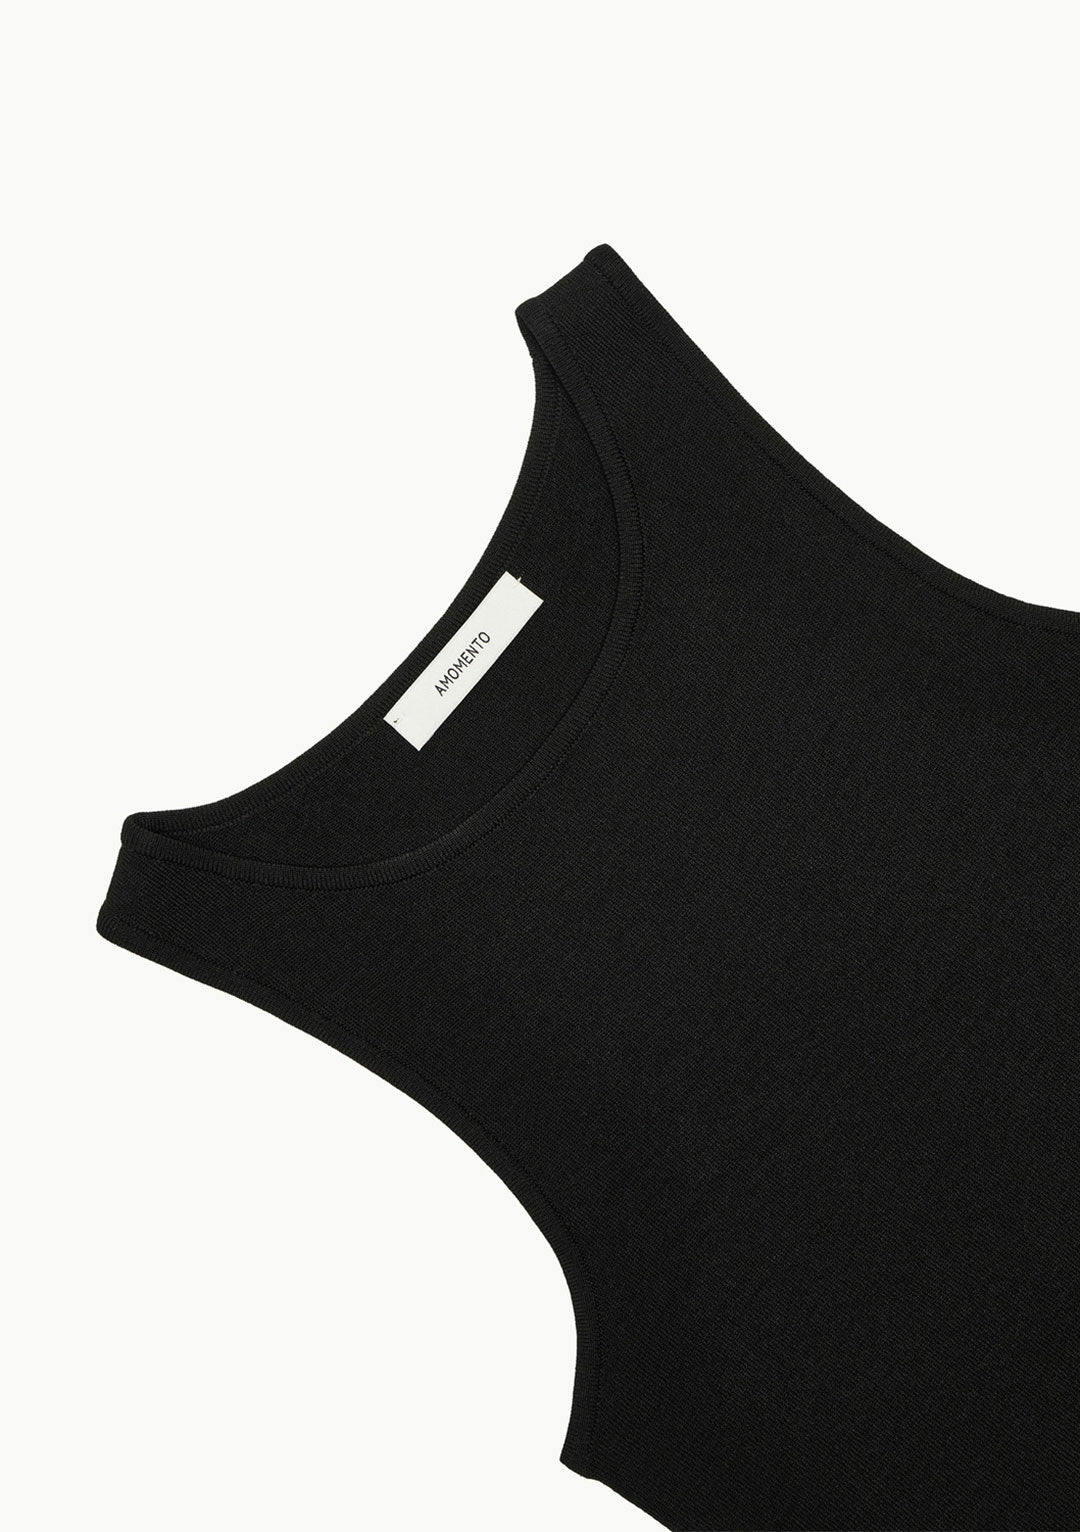 AMOMENTO CUT-OUT SLEEVELESS TOP